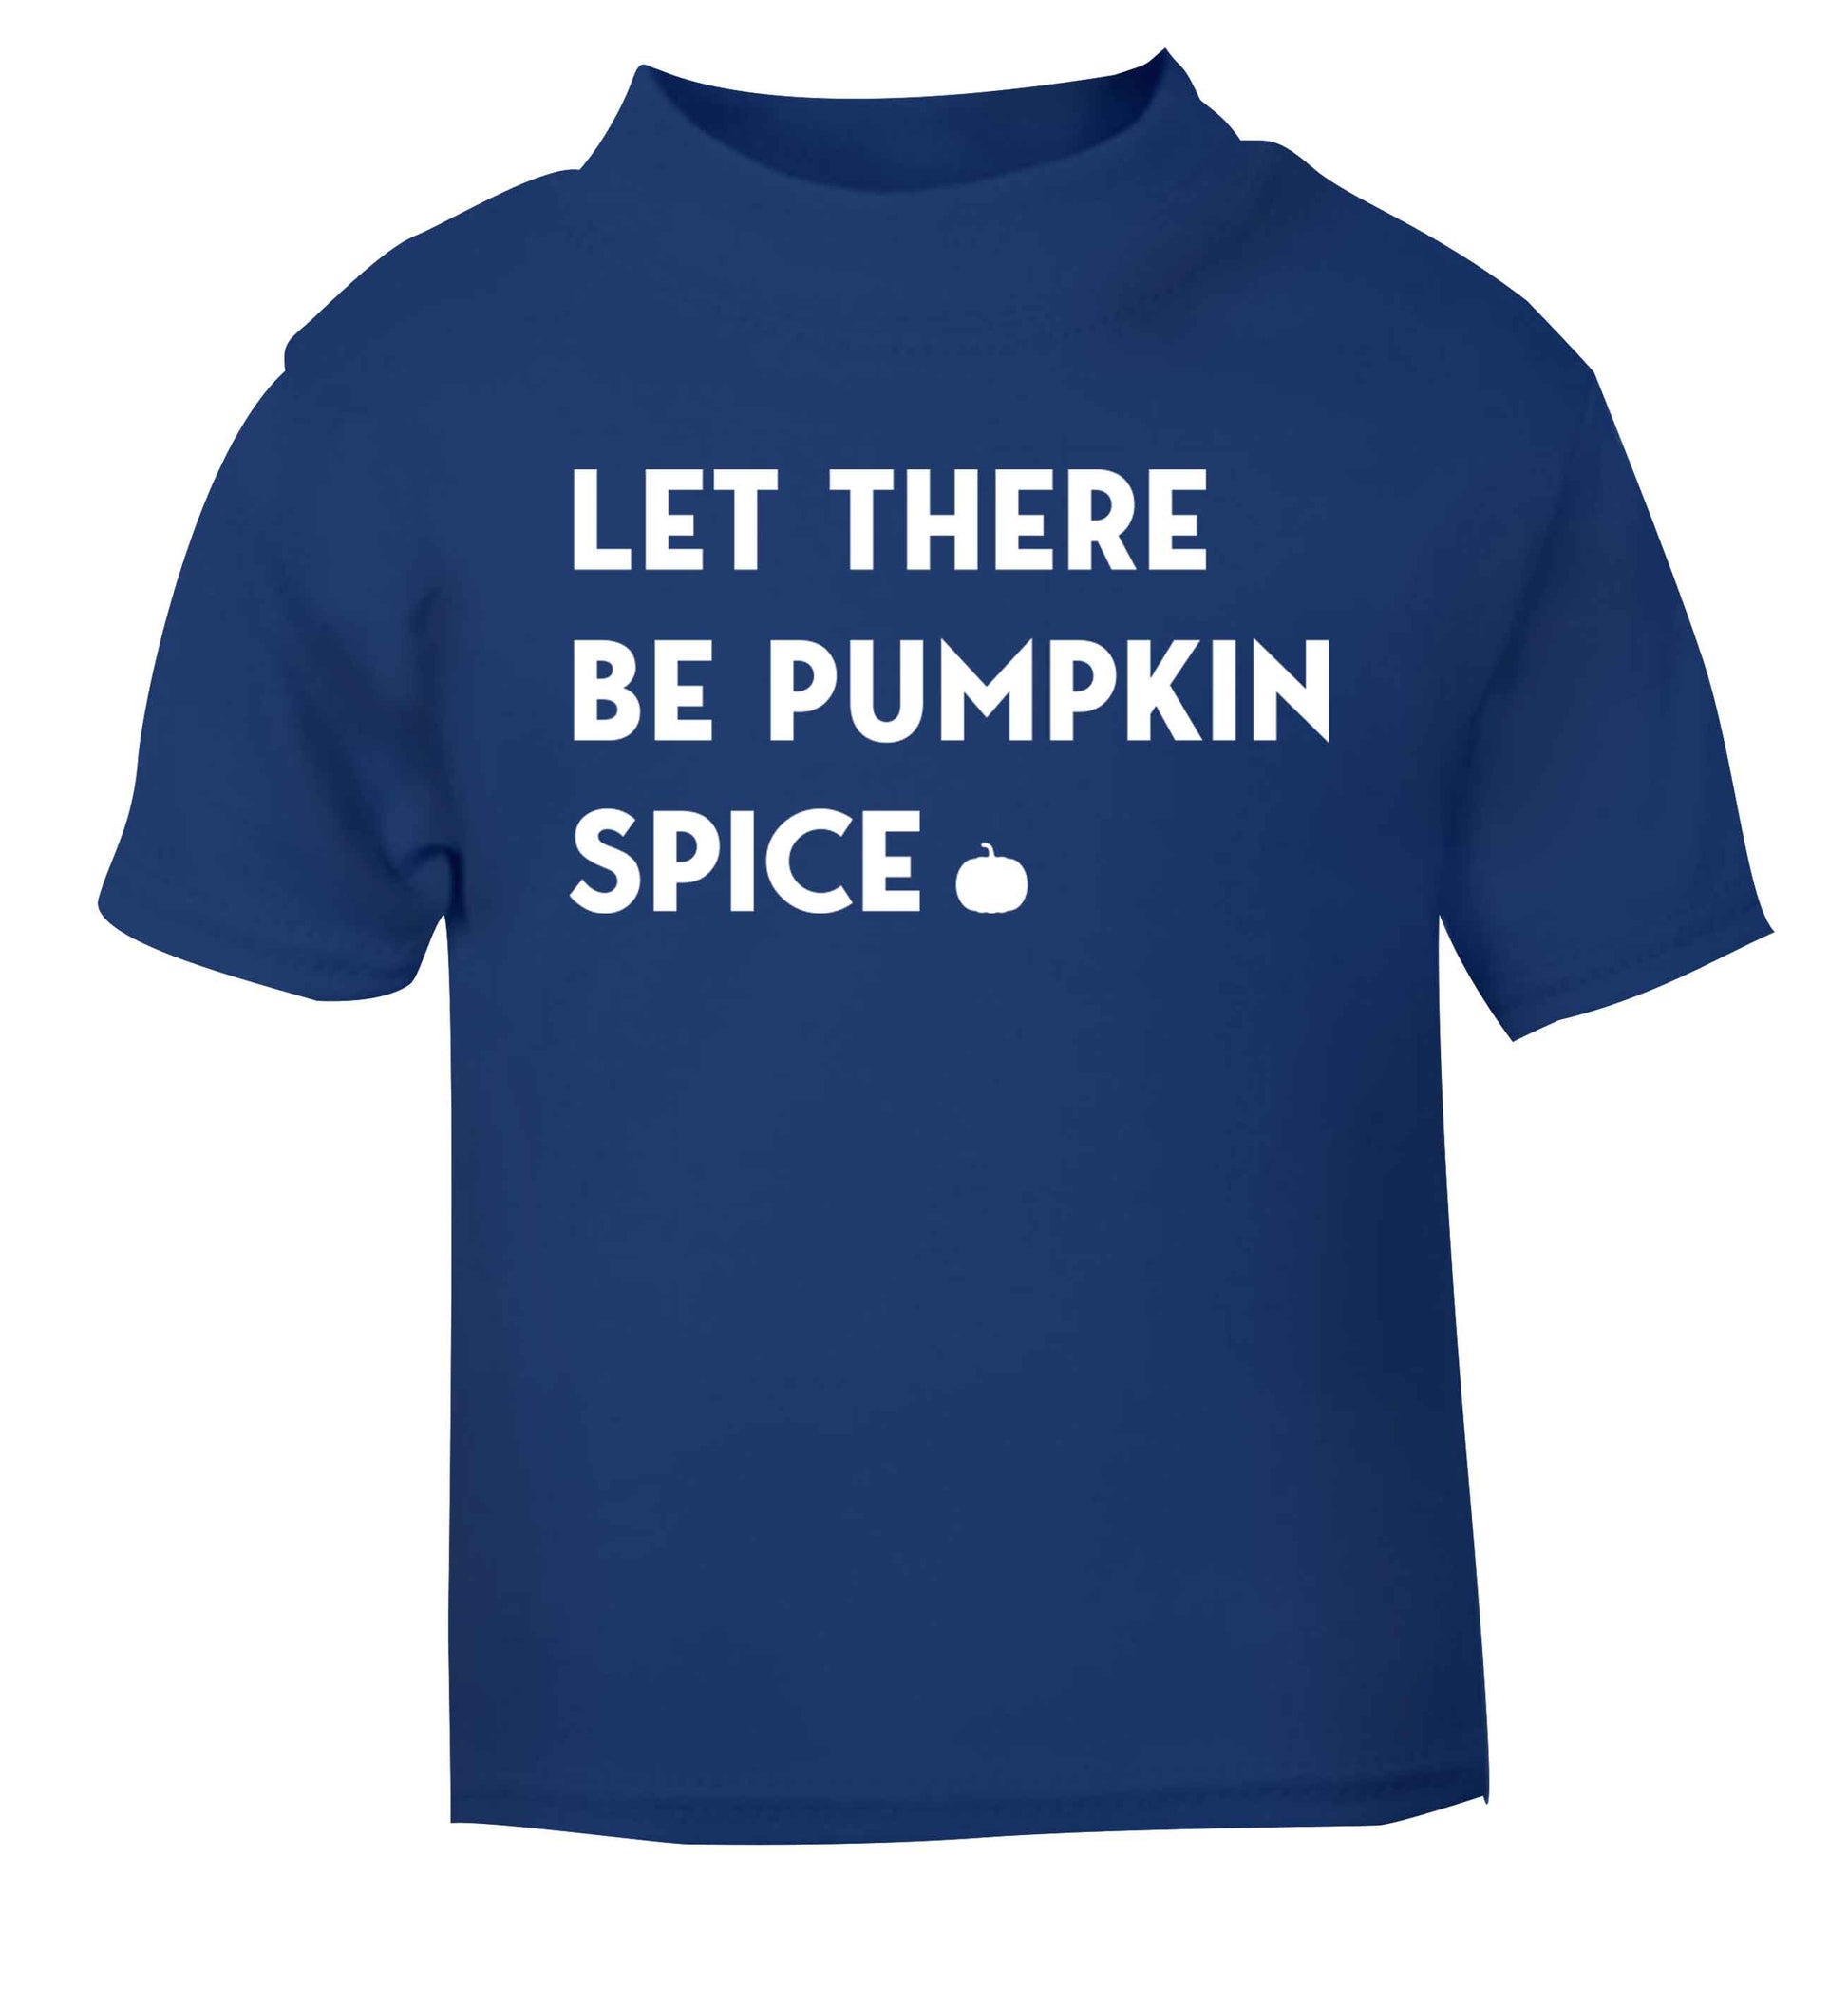 Let Be Pumpkin Spice blue baby toddler Tshirt 2 Years